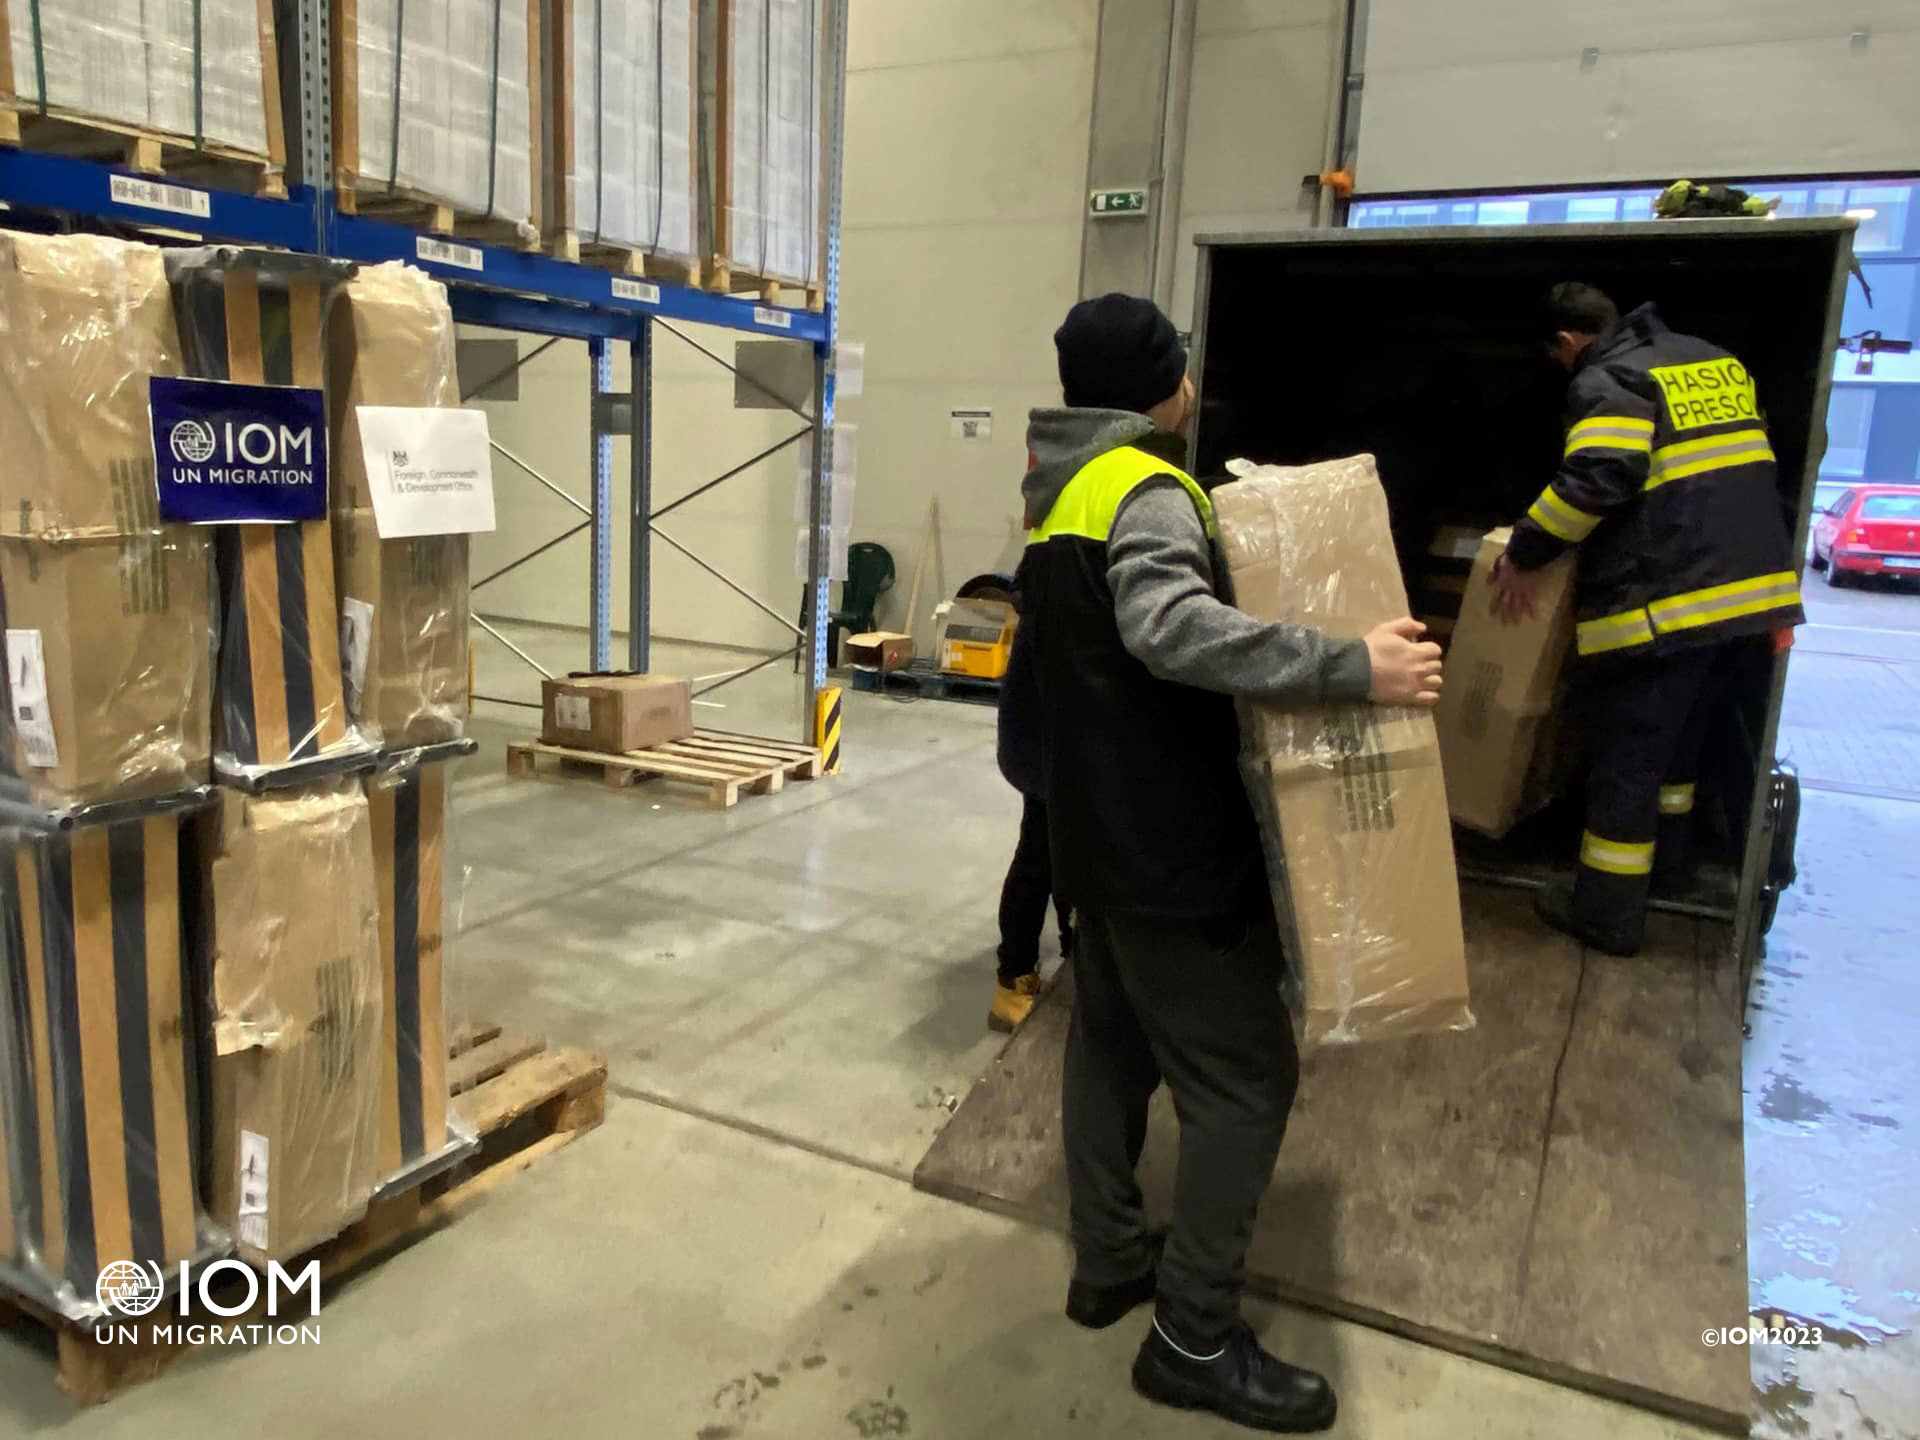 Volunteer Firefighters from Presov taking over IOM delivery of folding beds. Photo © International Organization for Migration (IOM) 2023.